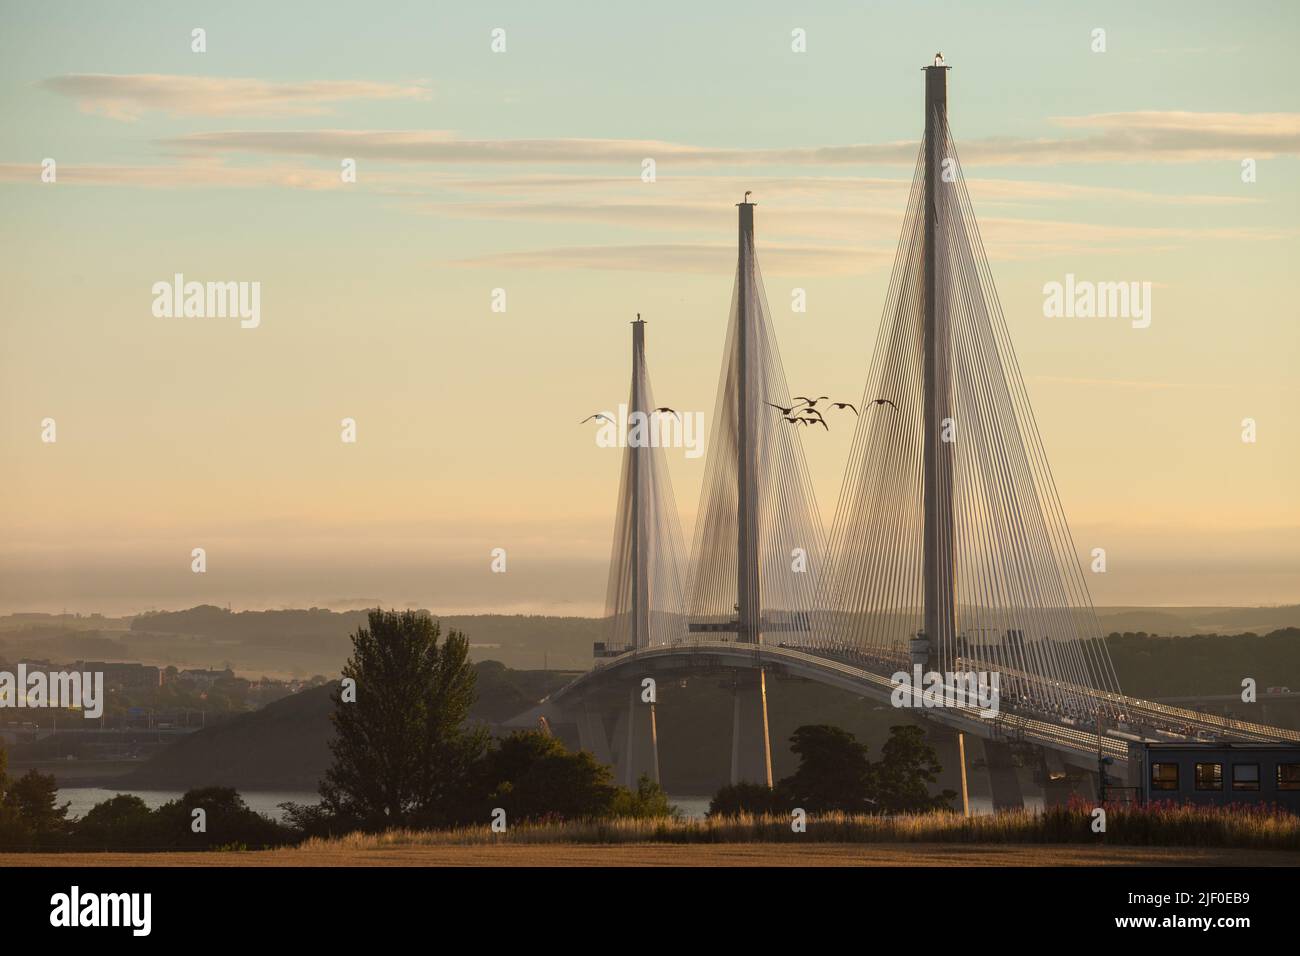 Geese flying in front of The Queensferry Crossing the new bridge over the Firth of Forth at sunrise, Edinburgh Scotland. Stock Photo